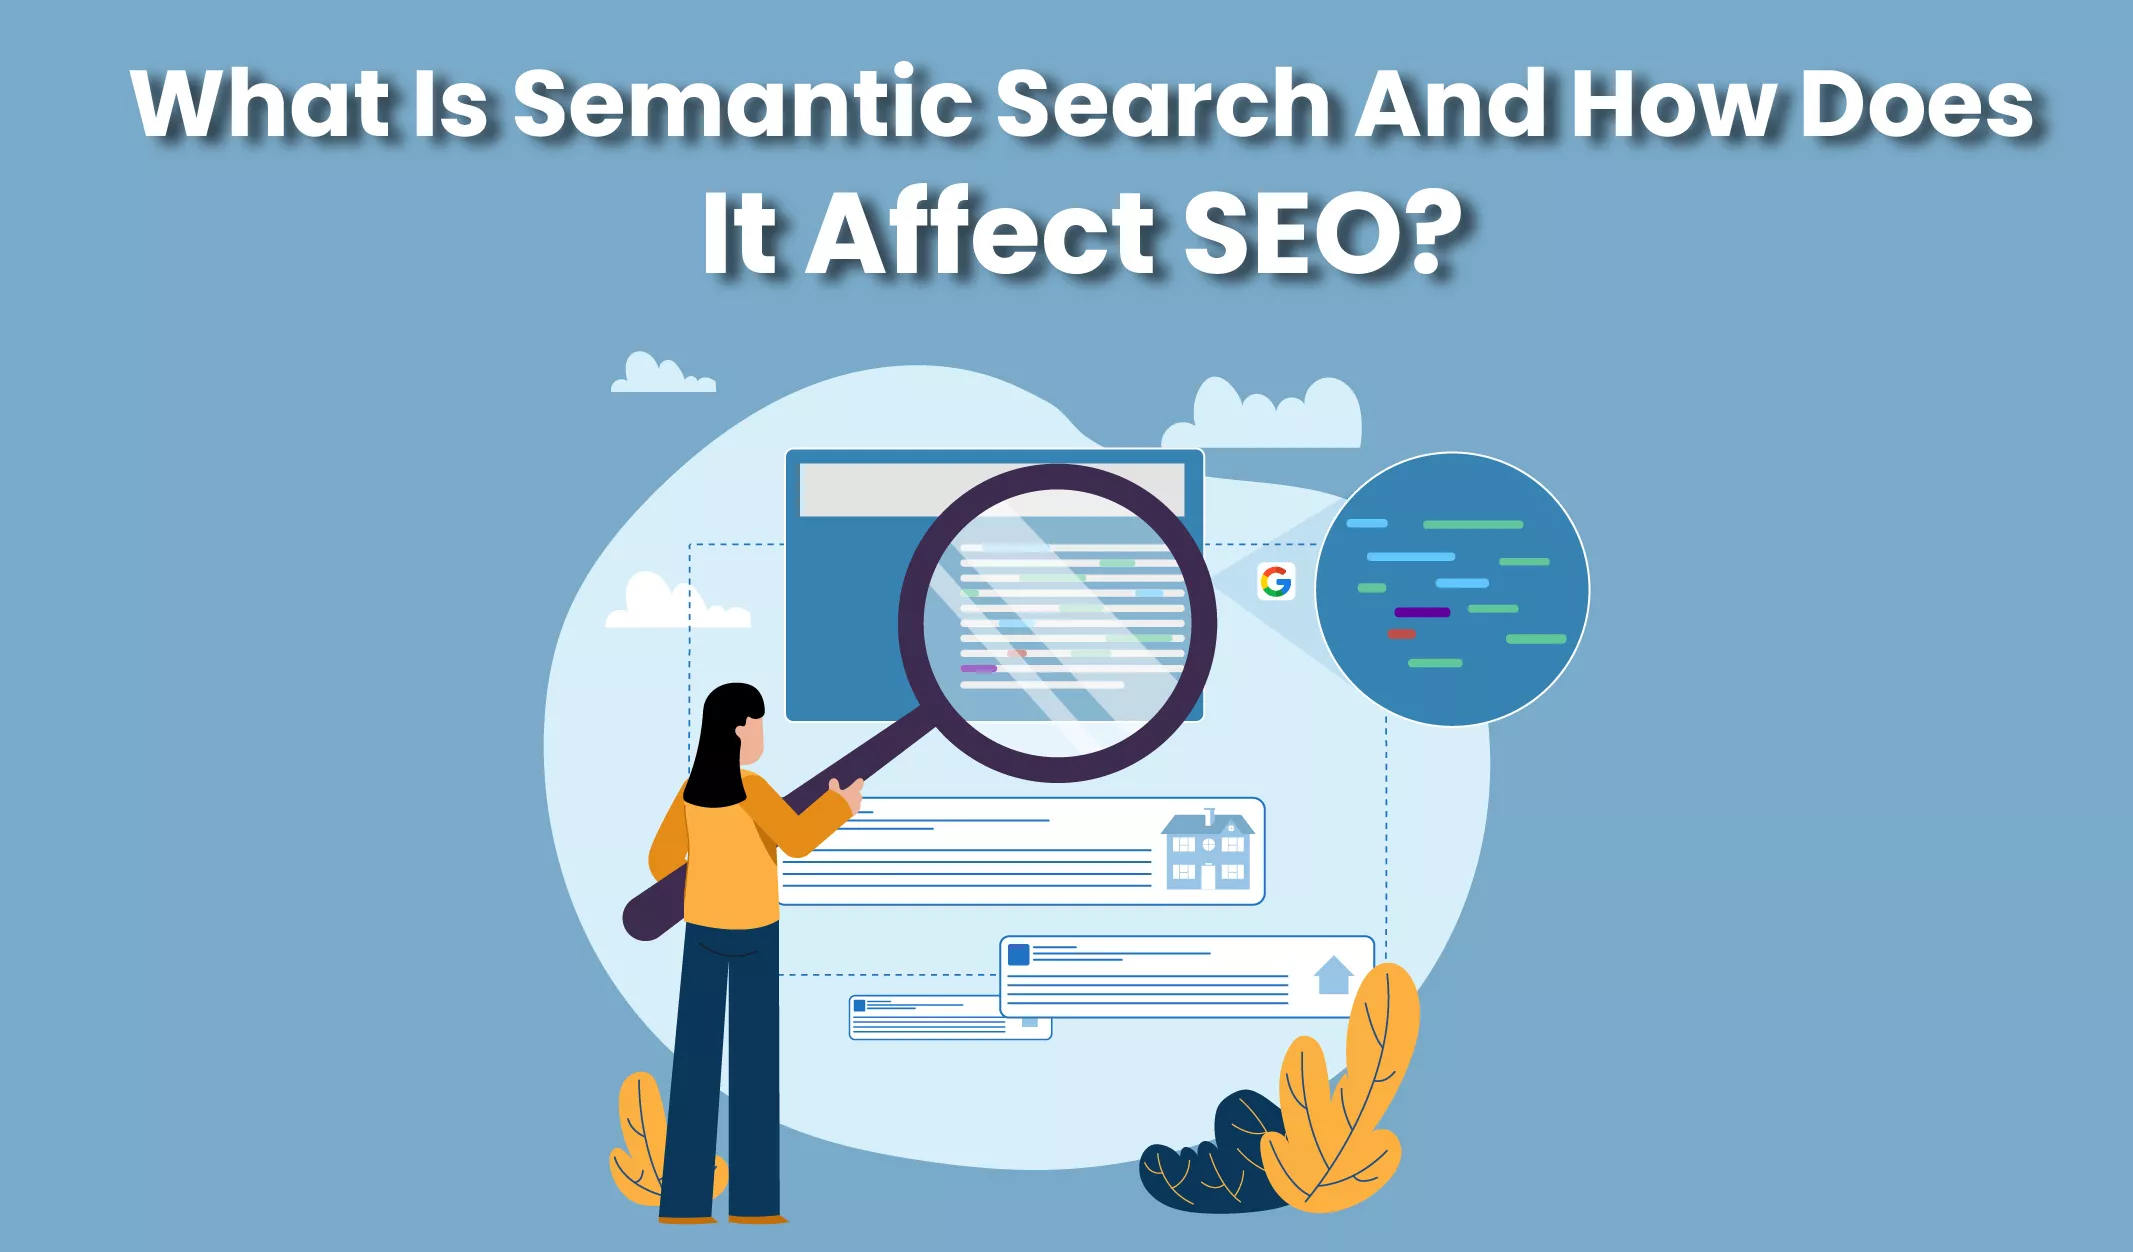 What is Semantic Search and how does it affect SEO?